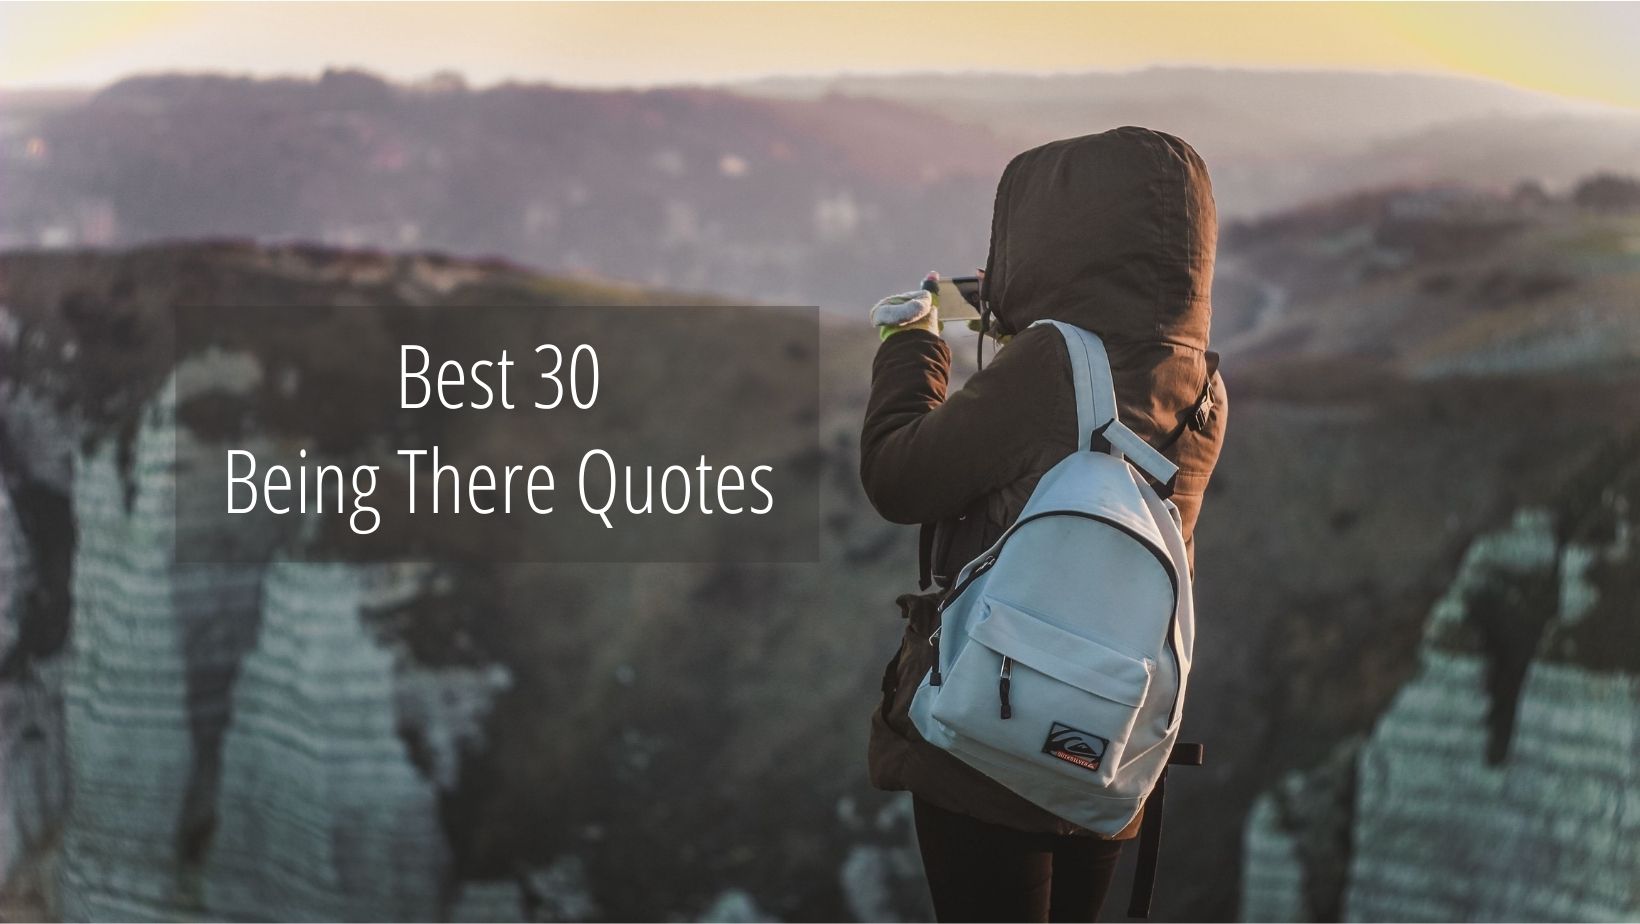 Best 30 Being There Quotes